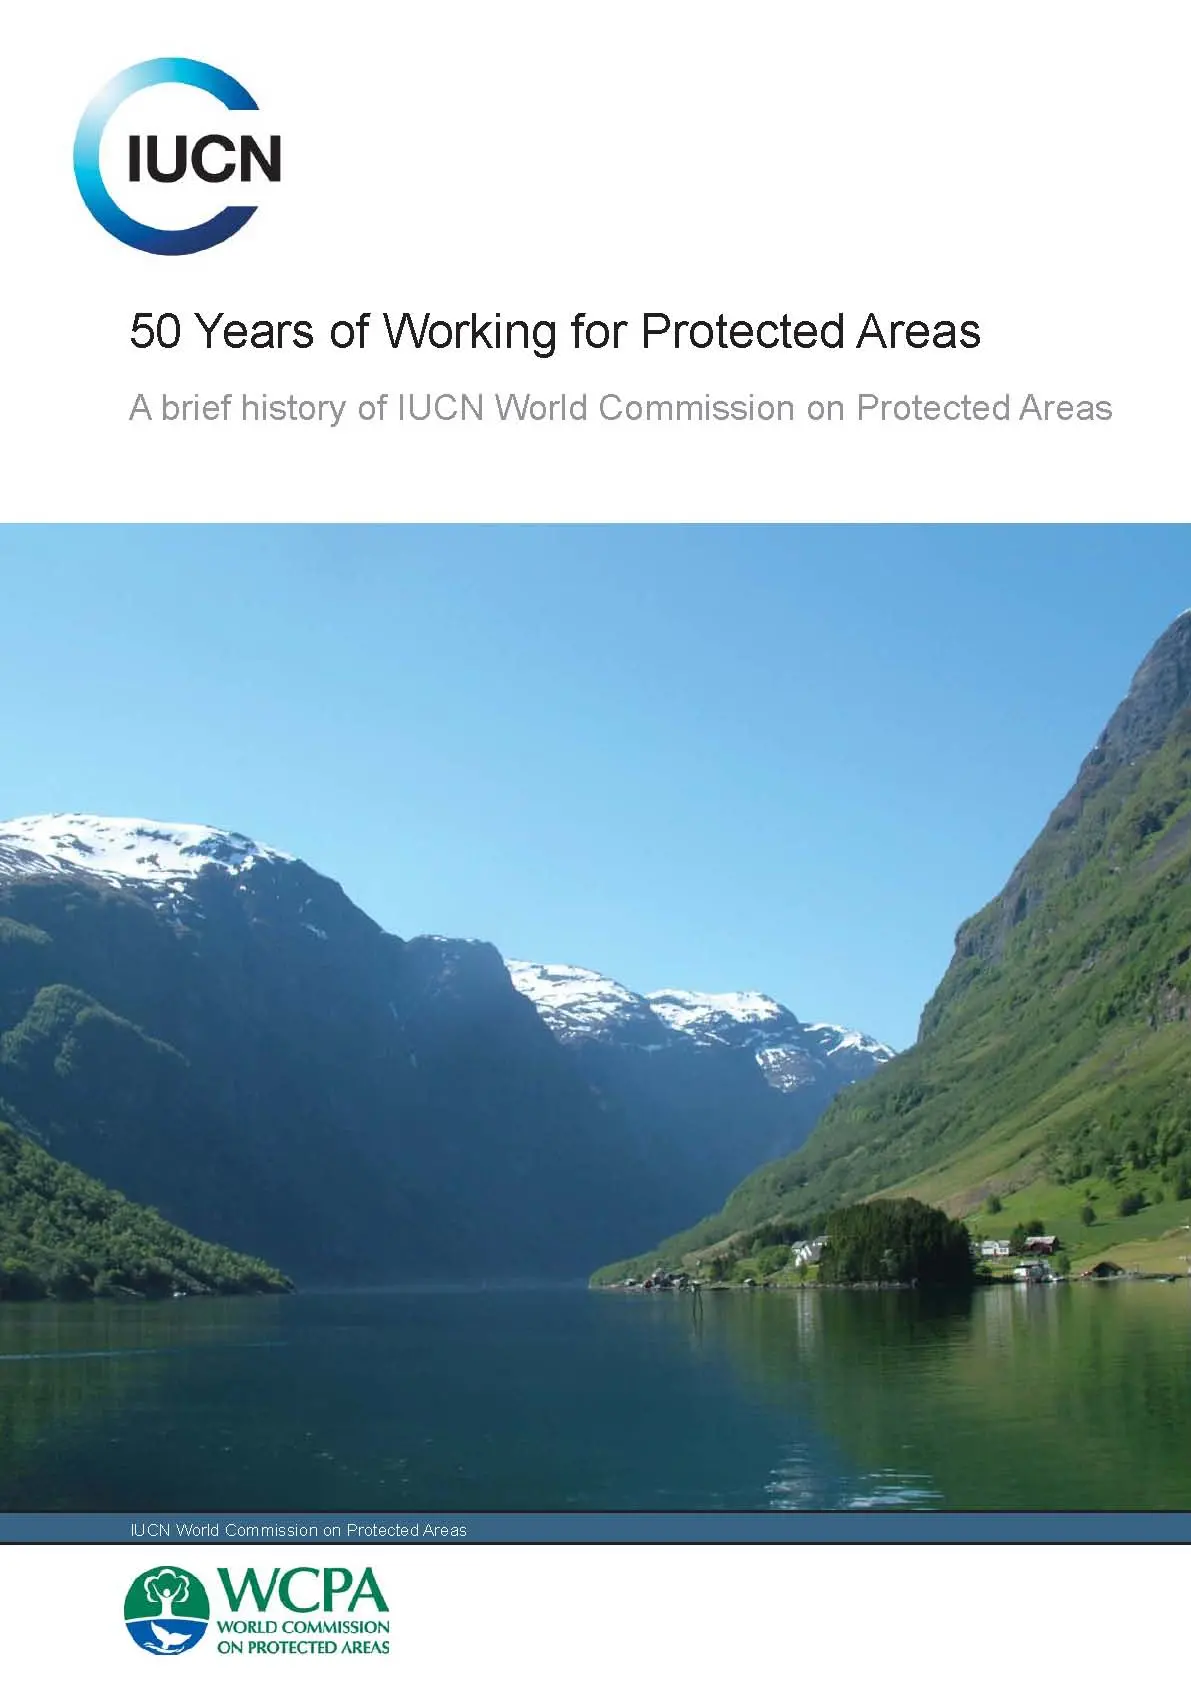 50 Years of working for protected areas - a brief history of IUCN World Commission on Protected Areas